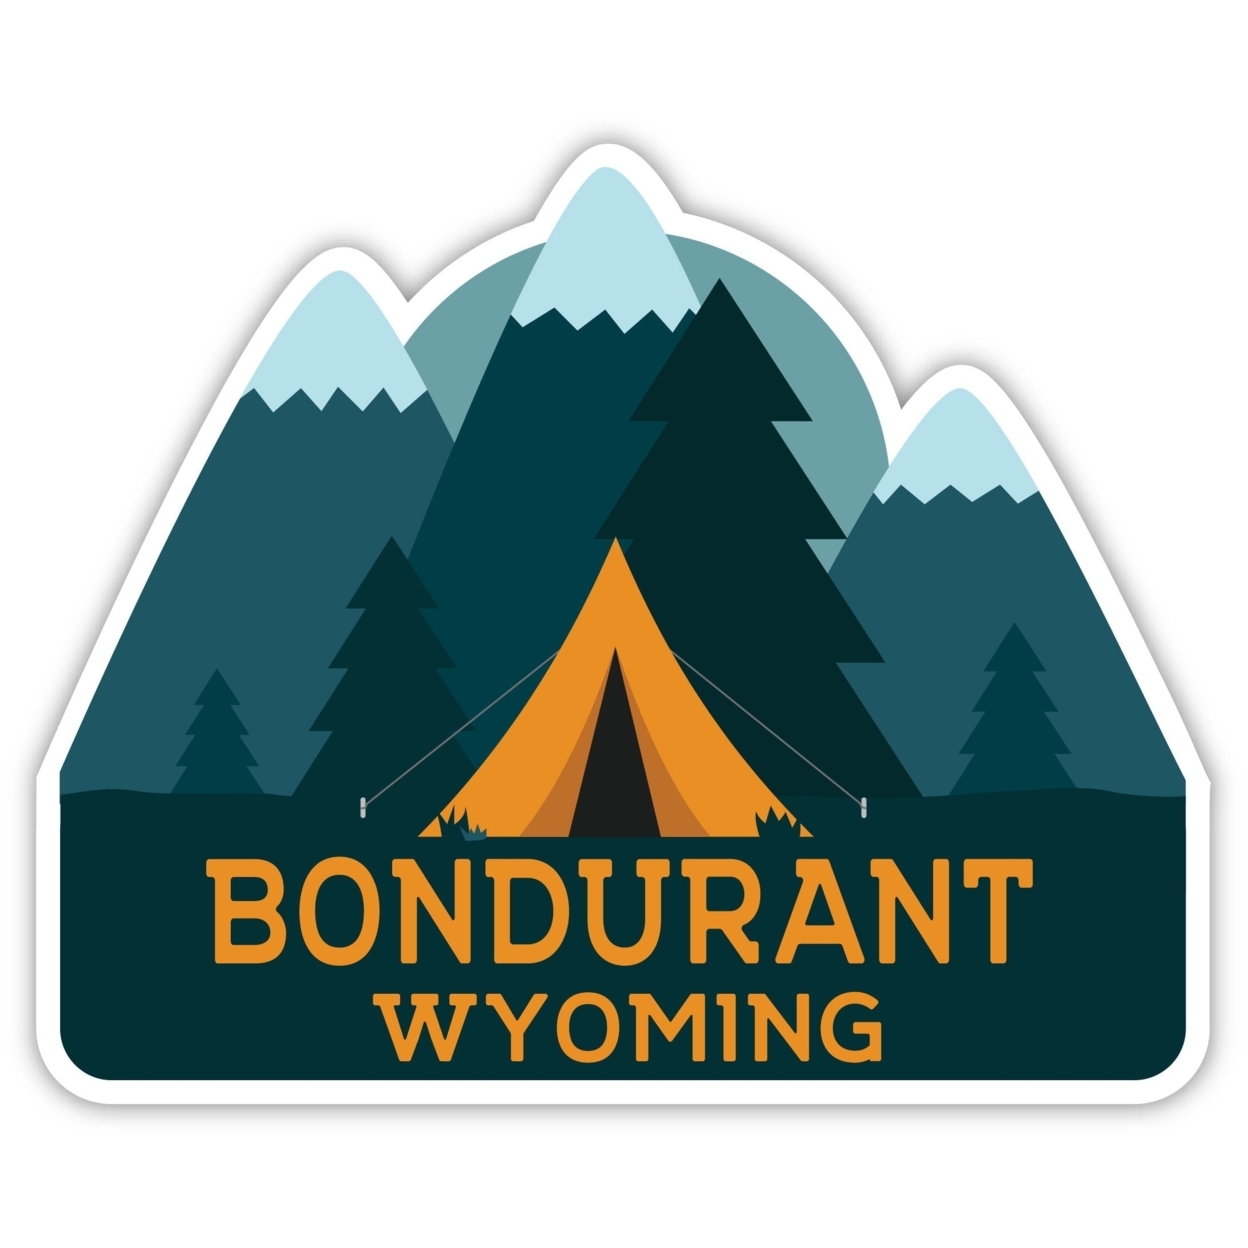 Bondurant Wyoming Souvenir Decorative Stickers (Choose Theme And Size) - 4-Pack, 4-Inch, Tent